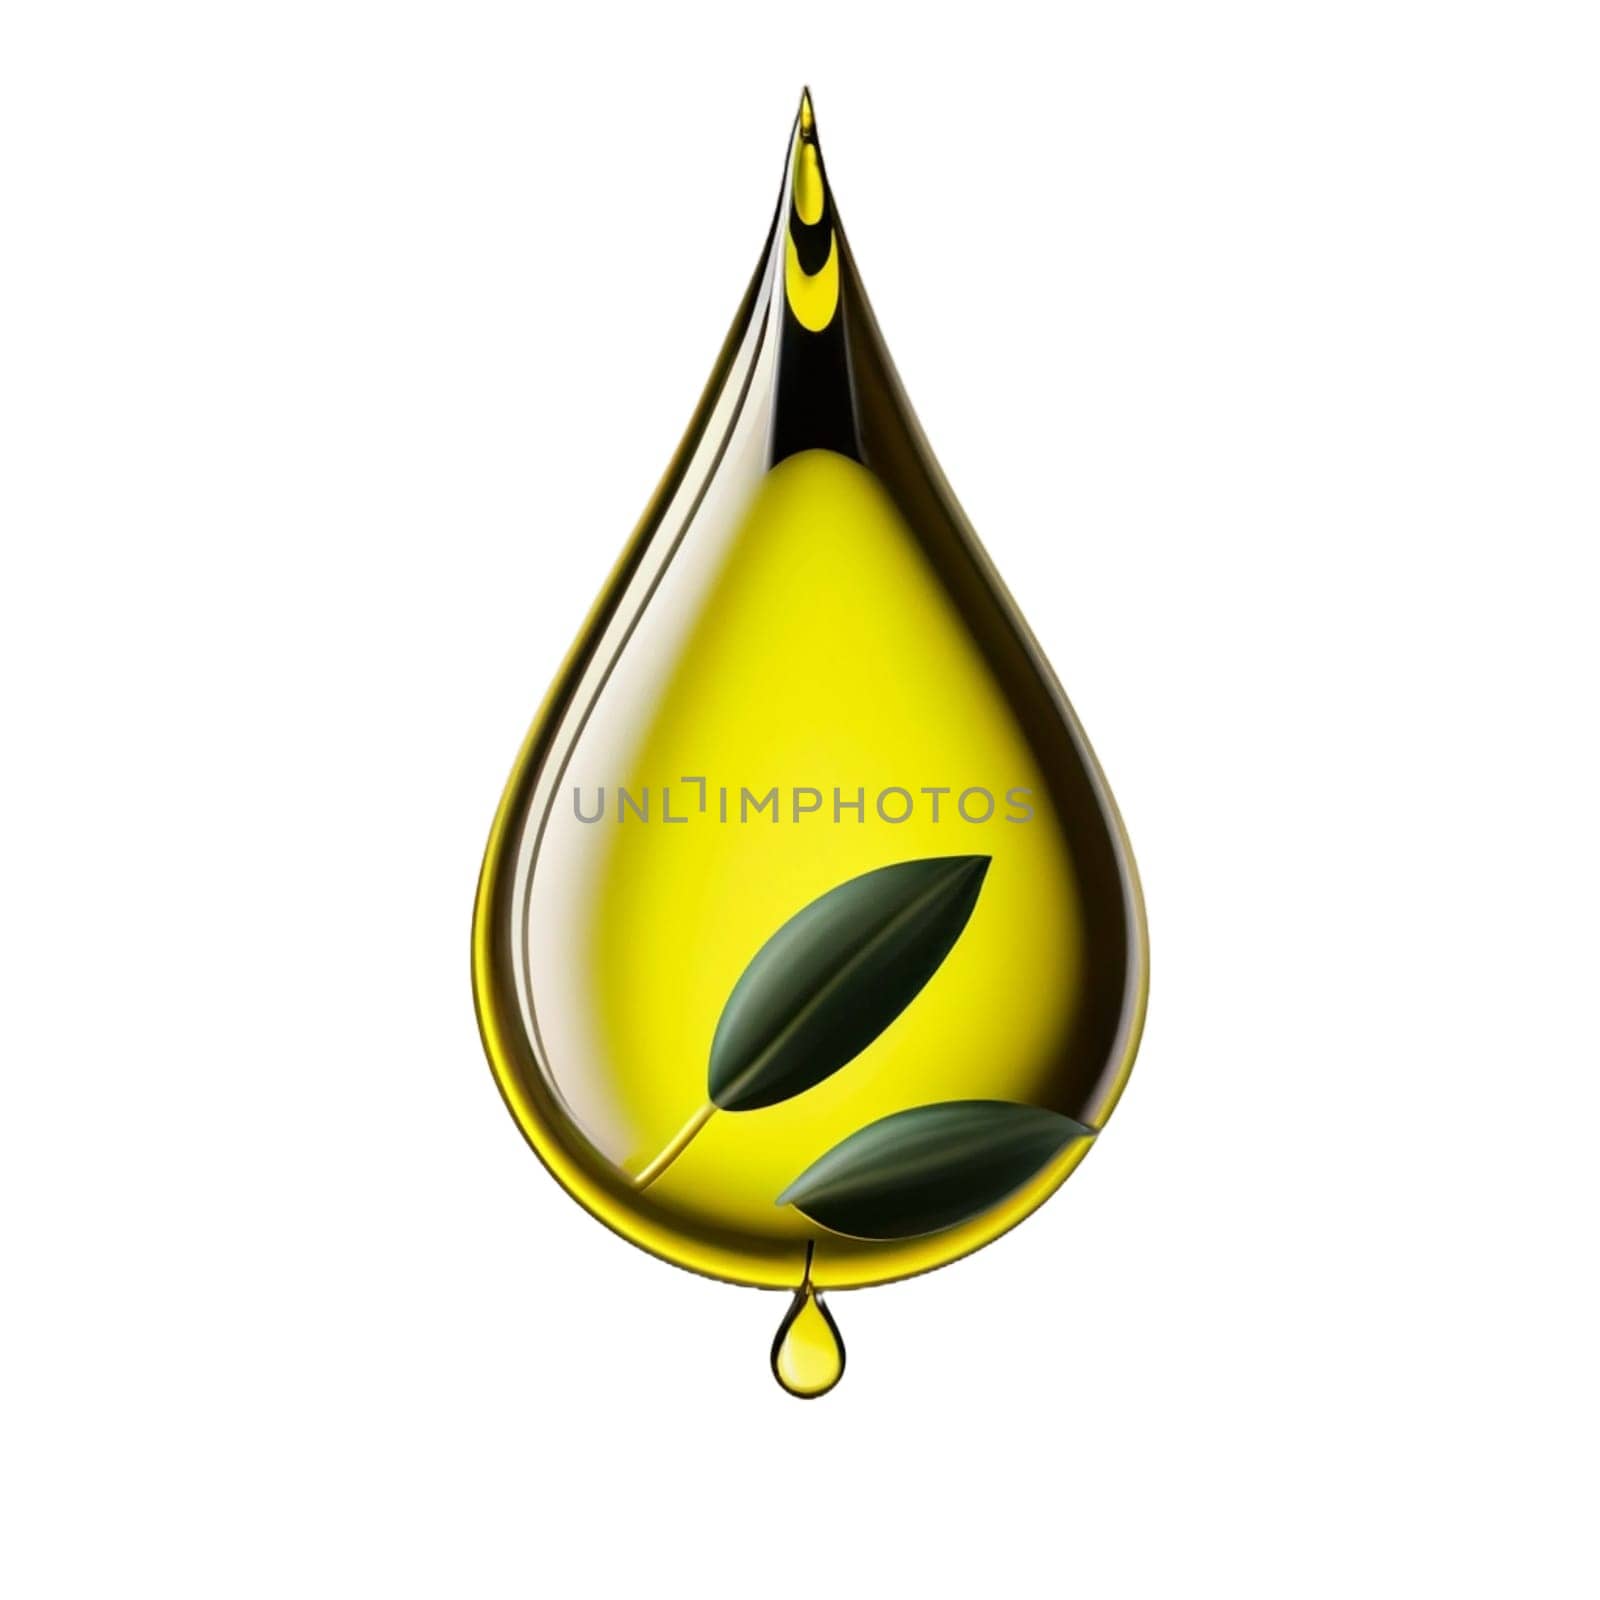 Oil drop isolated on white background as industrial or petroleum concept. png image by Costin